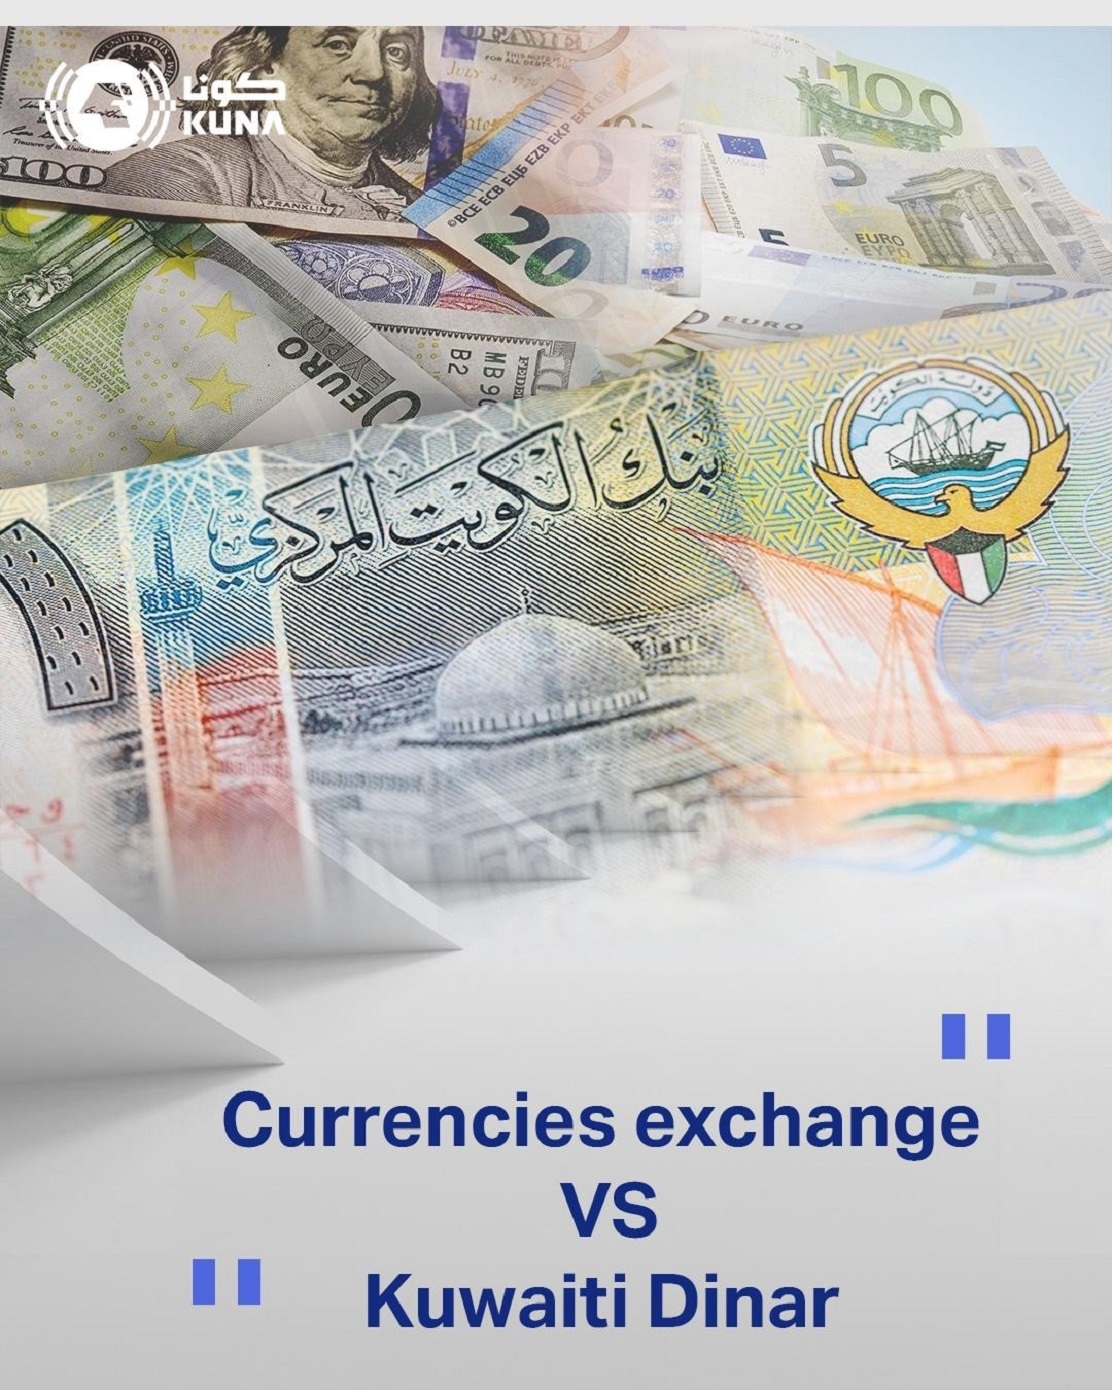 USD stabilizes at KD 0.307, EURO at KD 0.335 -- CBK                                                                                                                                                                                                       